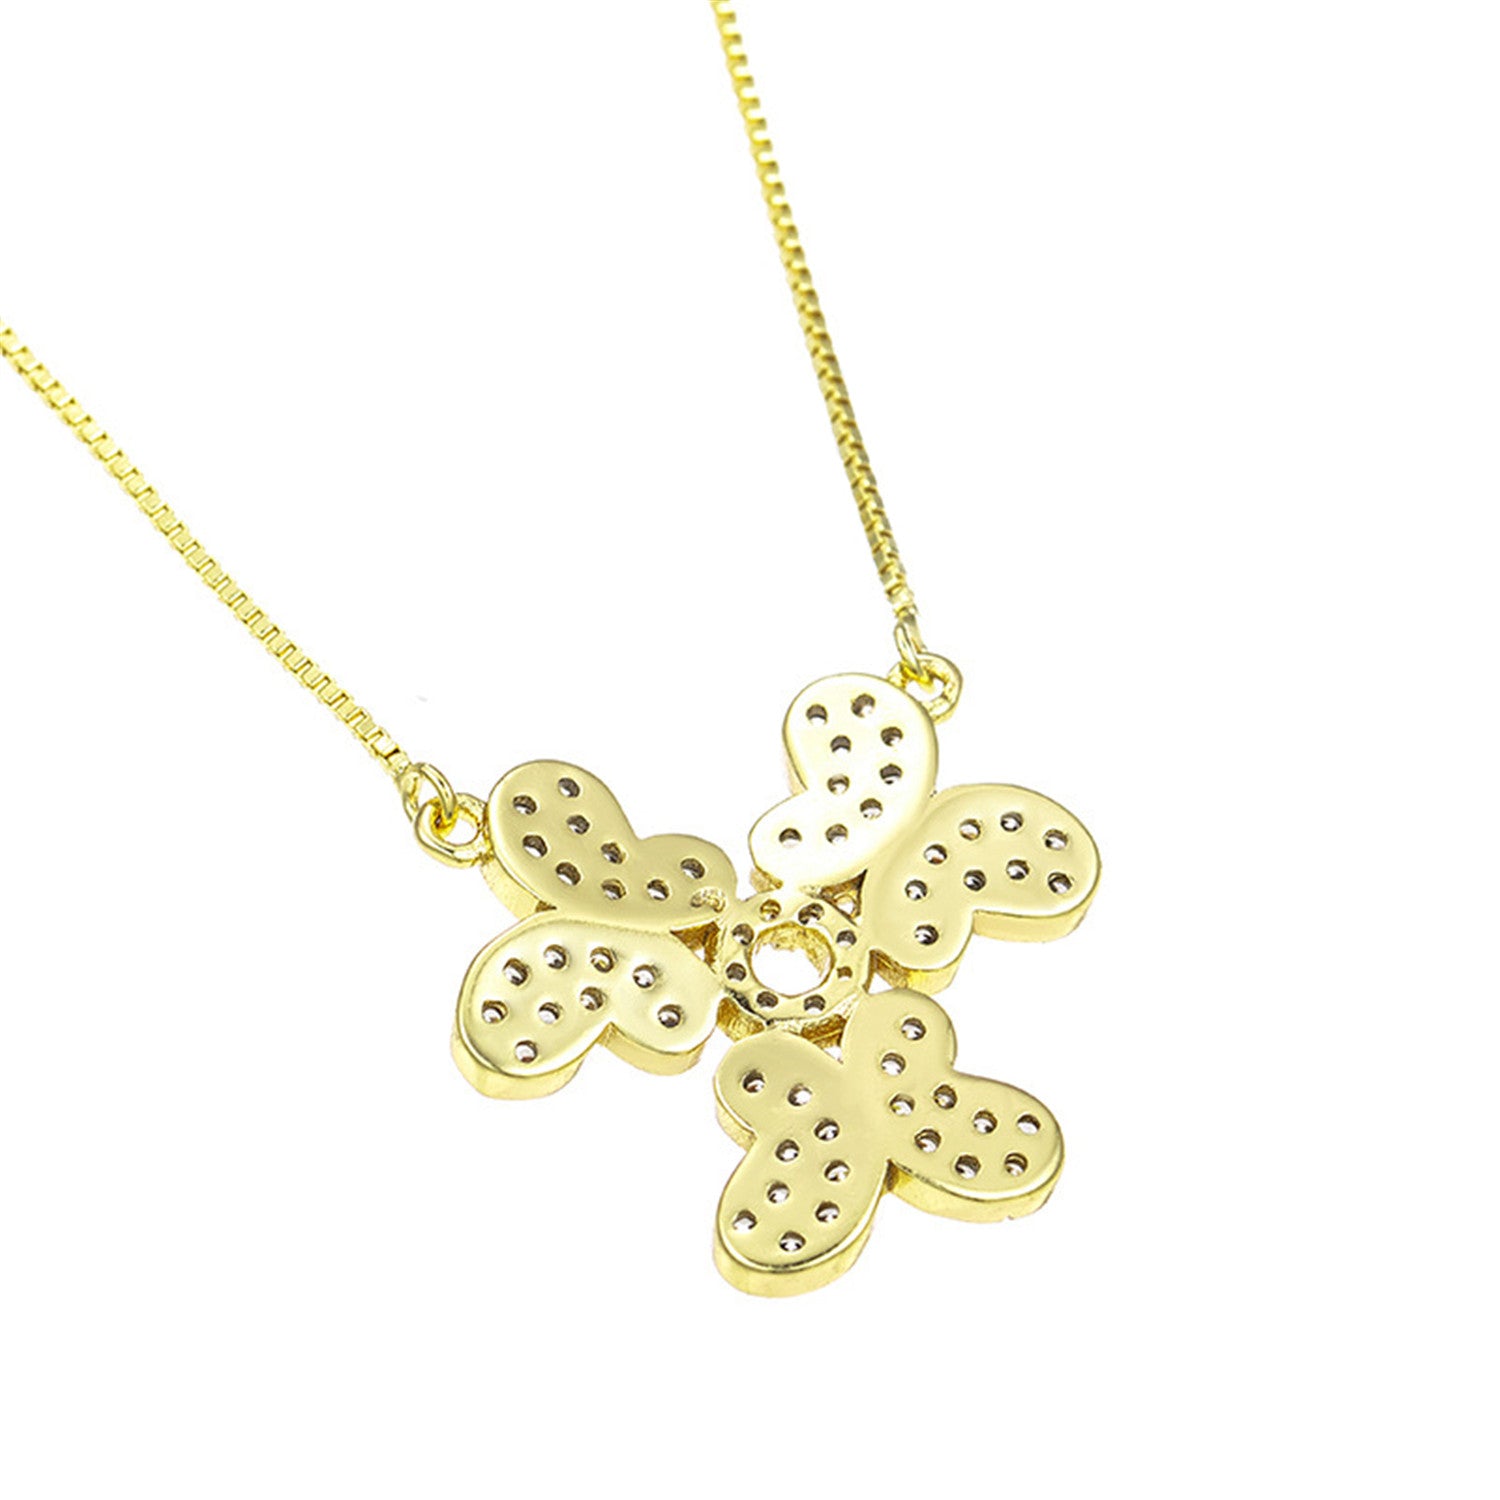 Butterfly Design Pendant,Copper Alloy 14K Gold Plated,With Cubic Zirconia